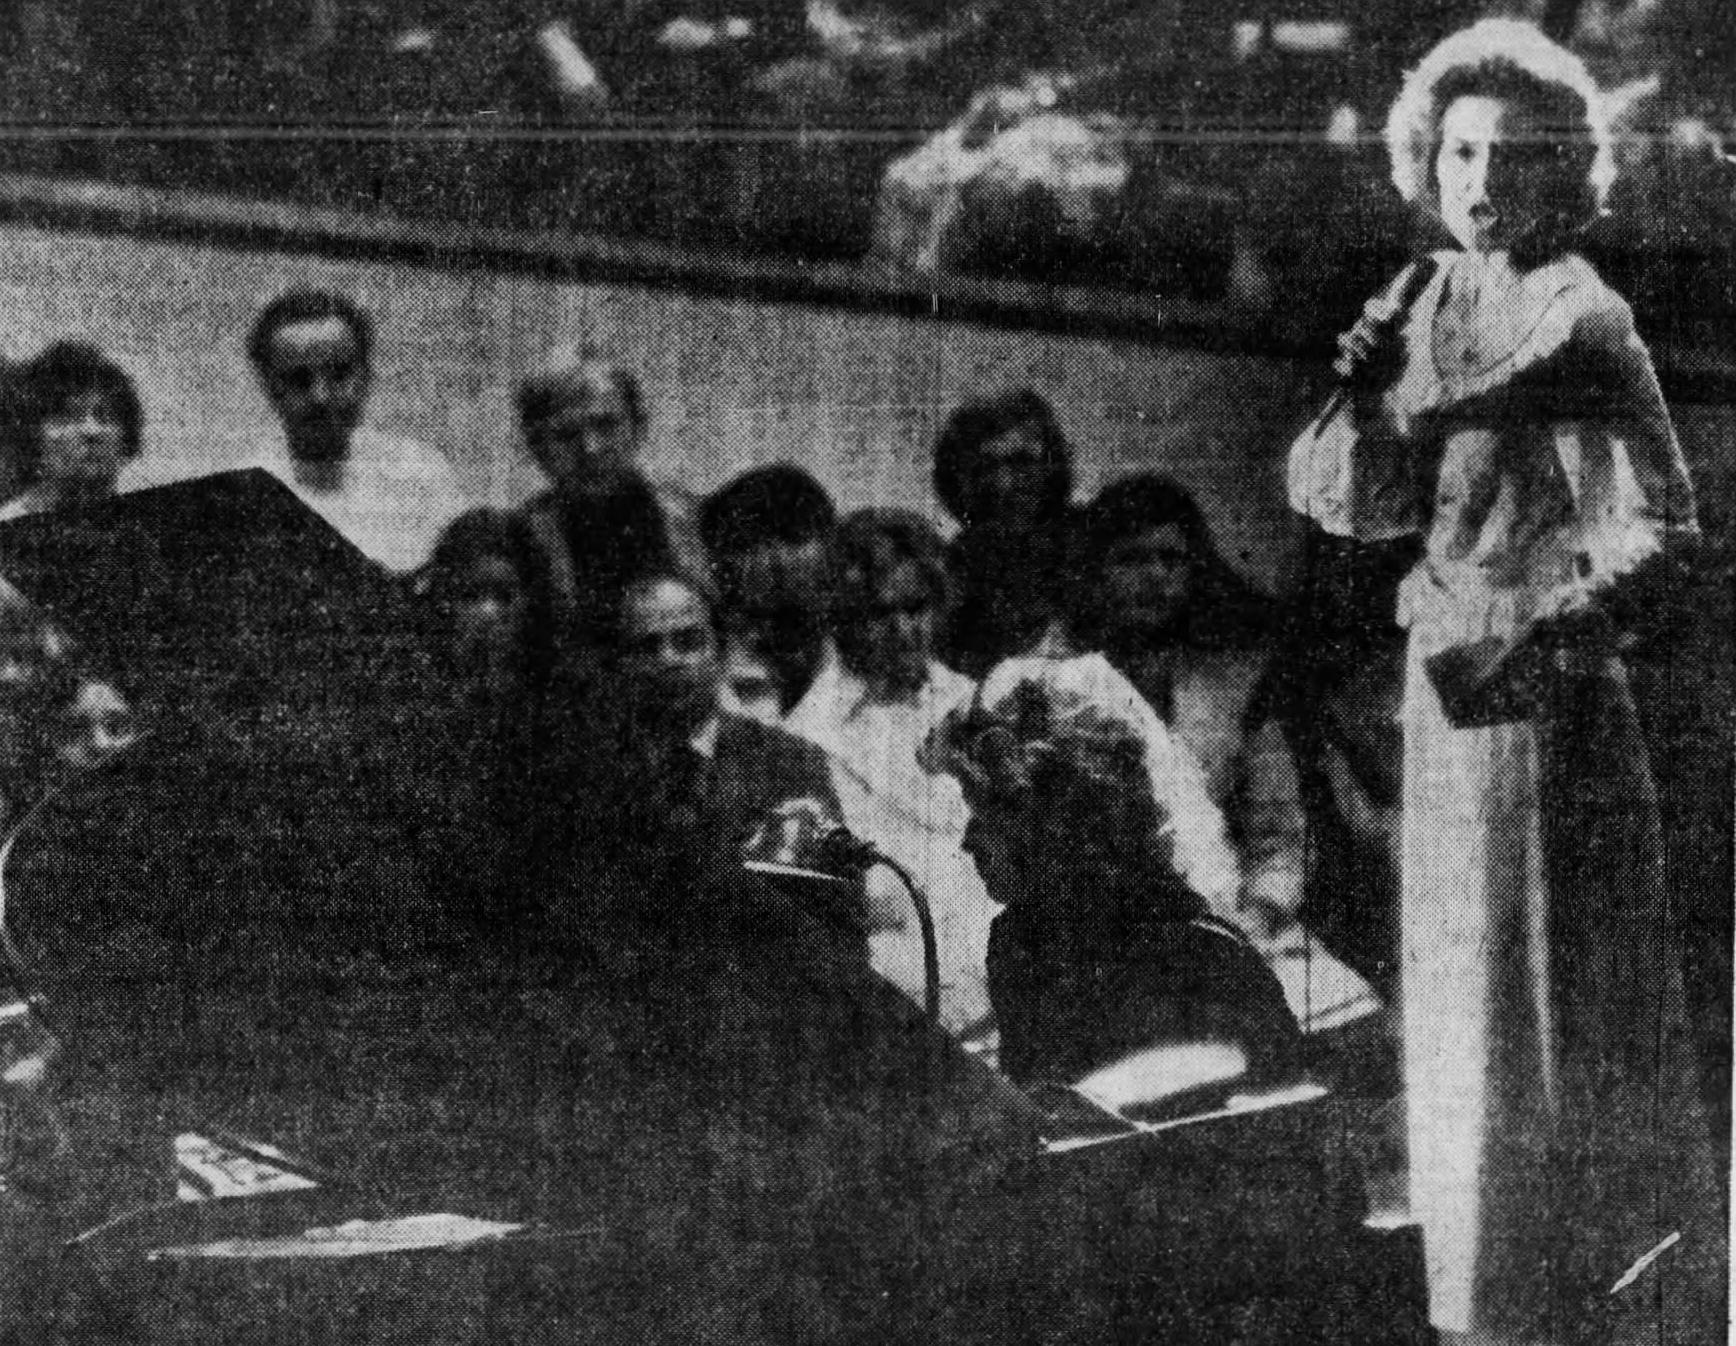 Anita Bryant stands on a stage and speaks into a microphone. A crowd sits in the background. 